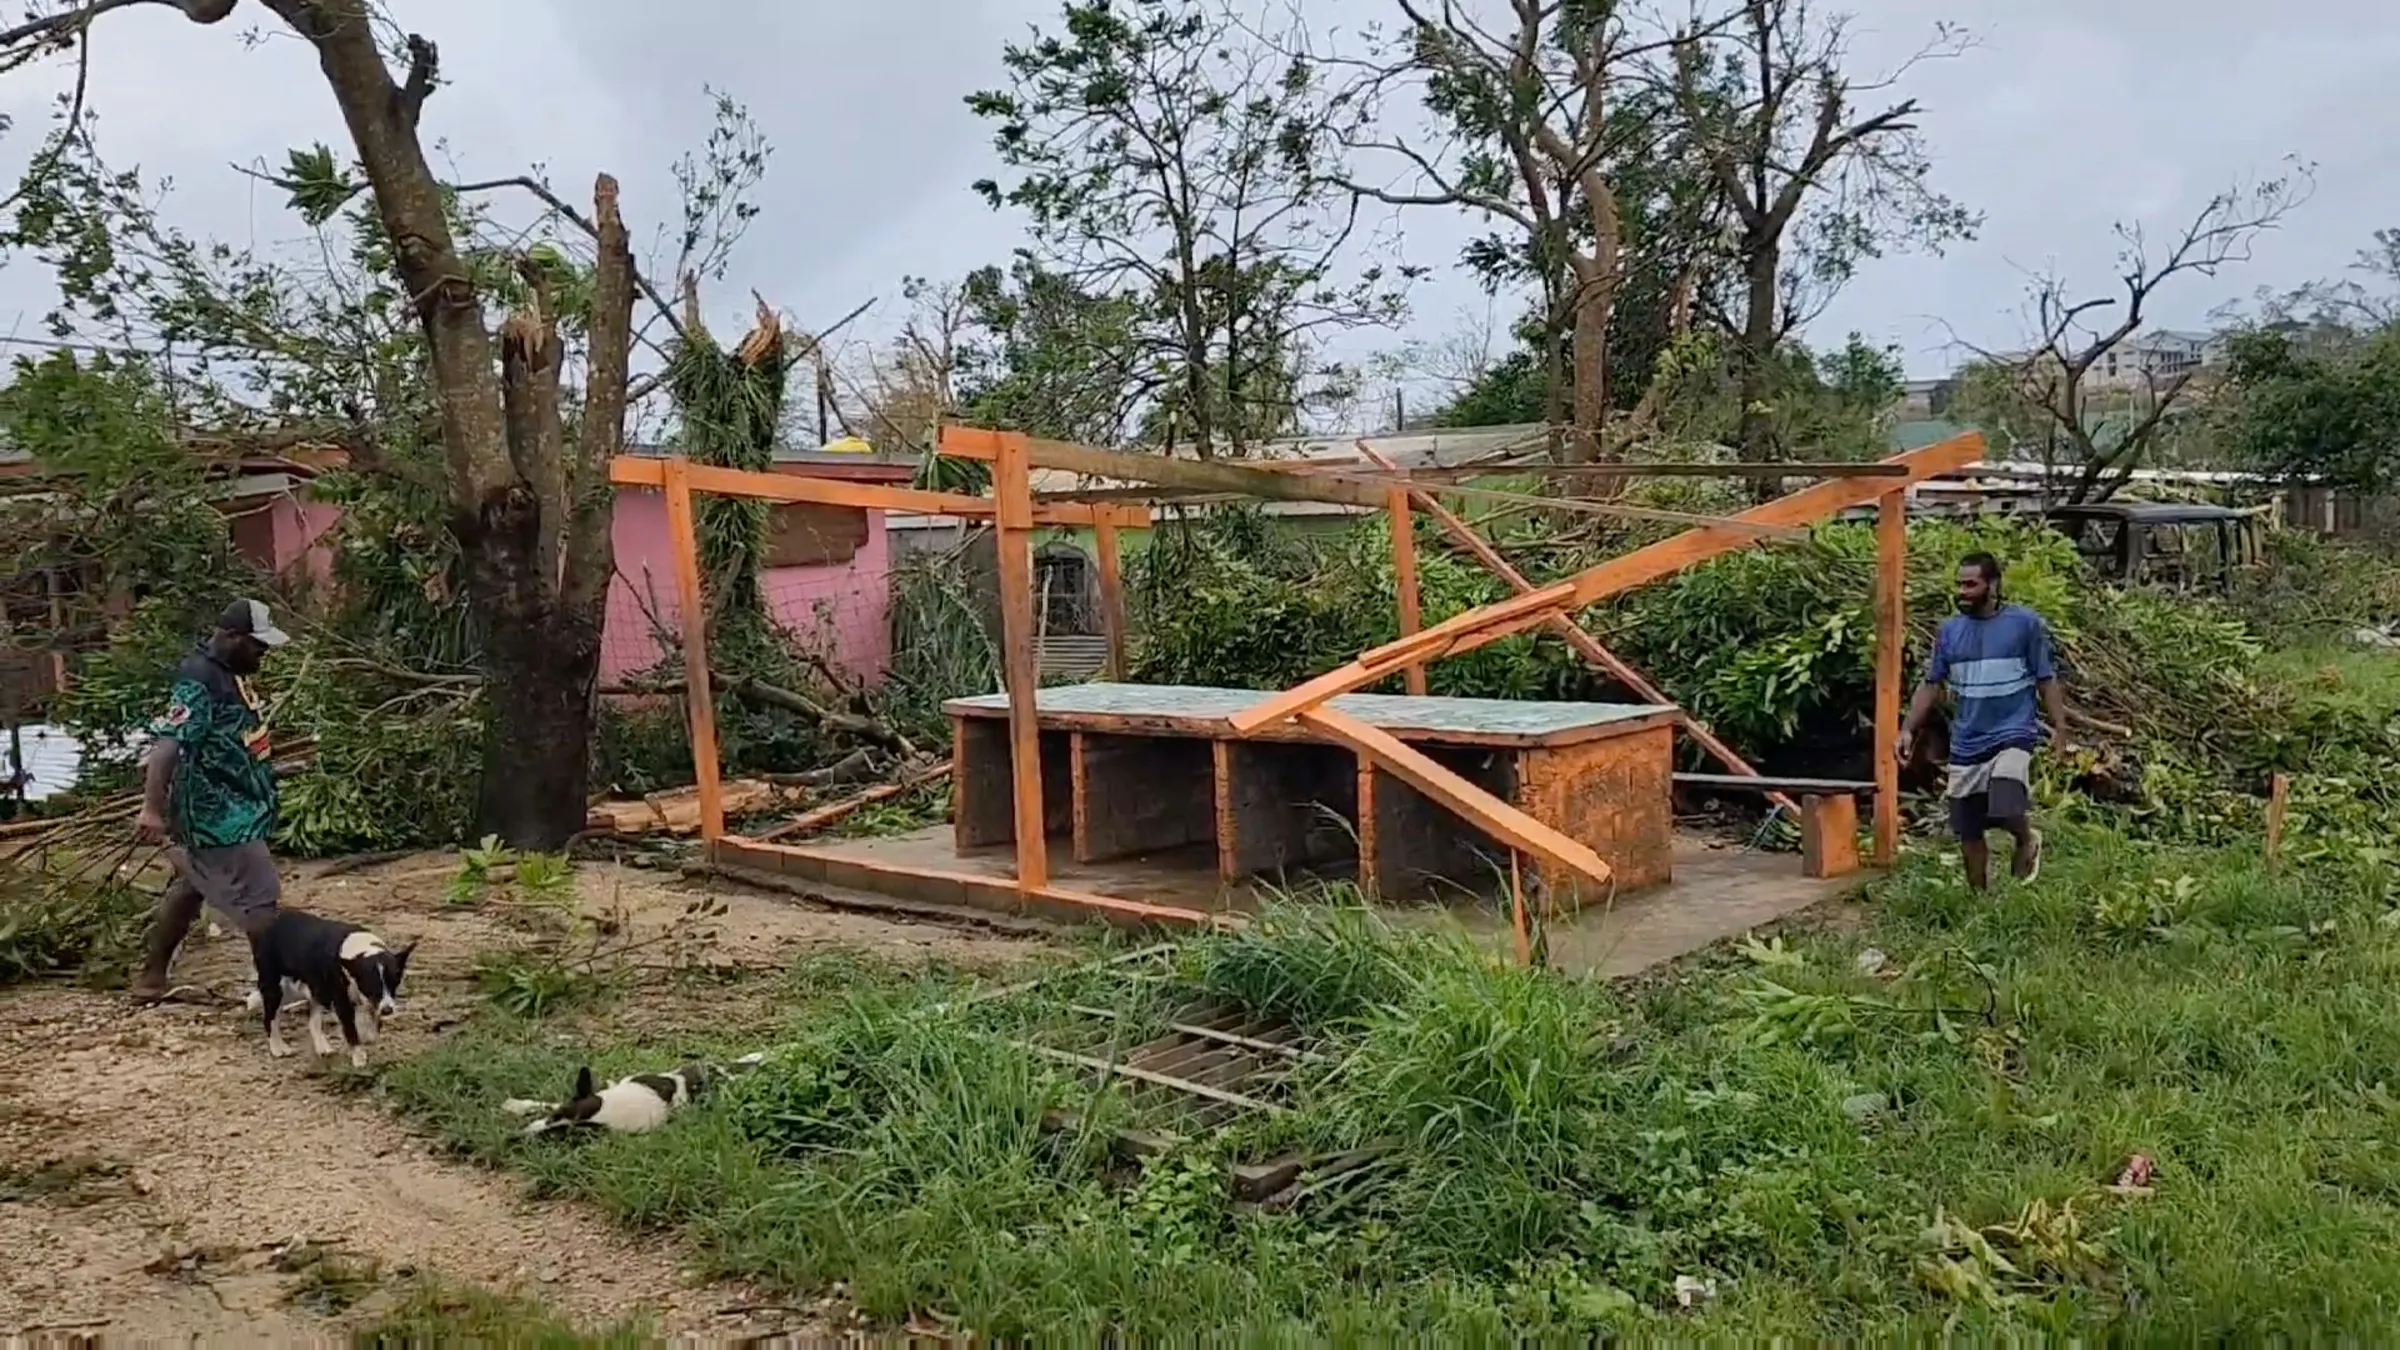 A view of the damage in the aftermath of Cyclone Kevin, in Port Vila, Vanuatu, March 4, 2023, in this screen grab obtained from a social media video. DevMode/via REUTERS